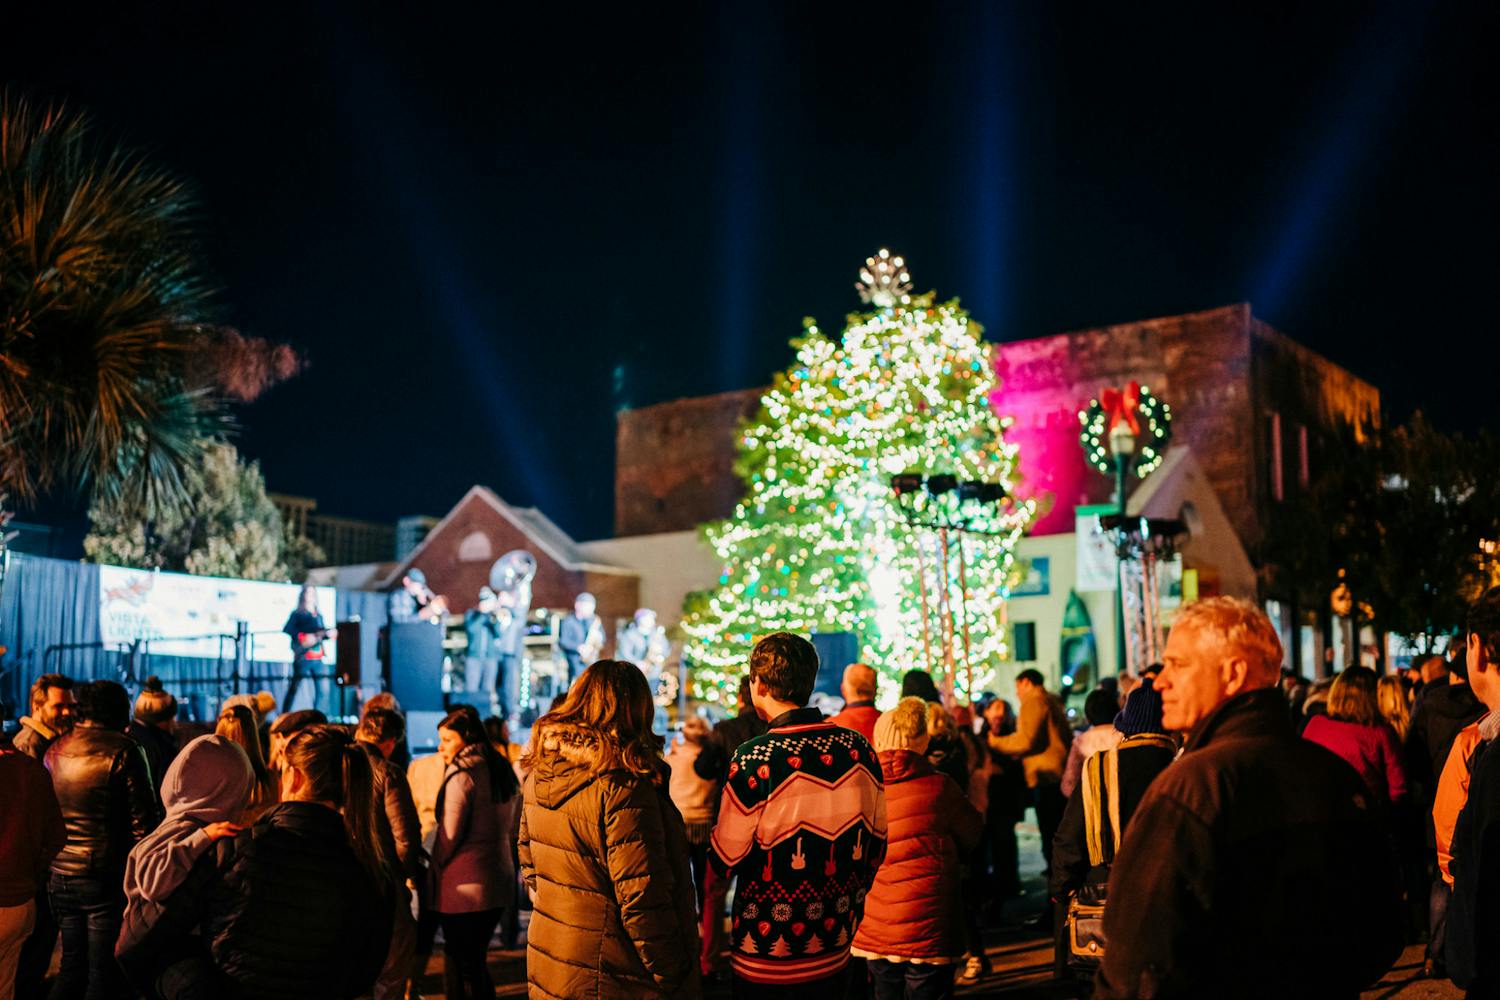 Crowds fill the street at the annual Vista Lights event in November 2022. The event is put together by the Congaree Vista Guild, a membership-based nonprofit organization dedicated to promoting the Vista.